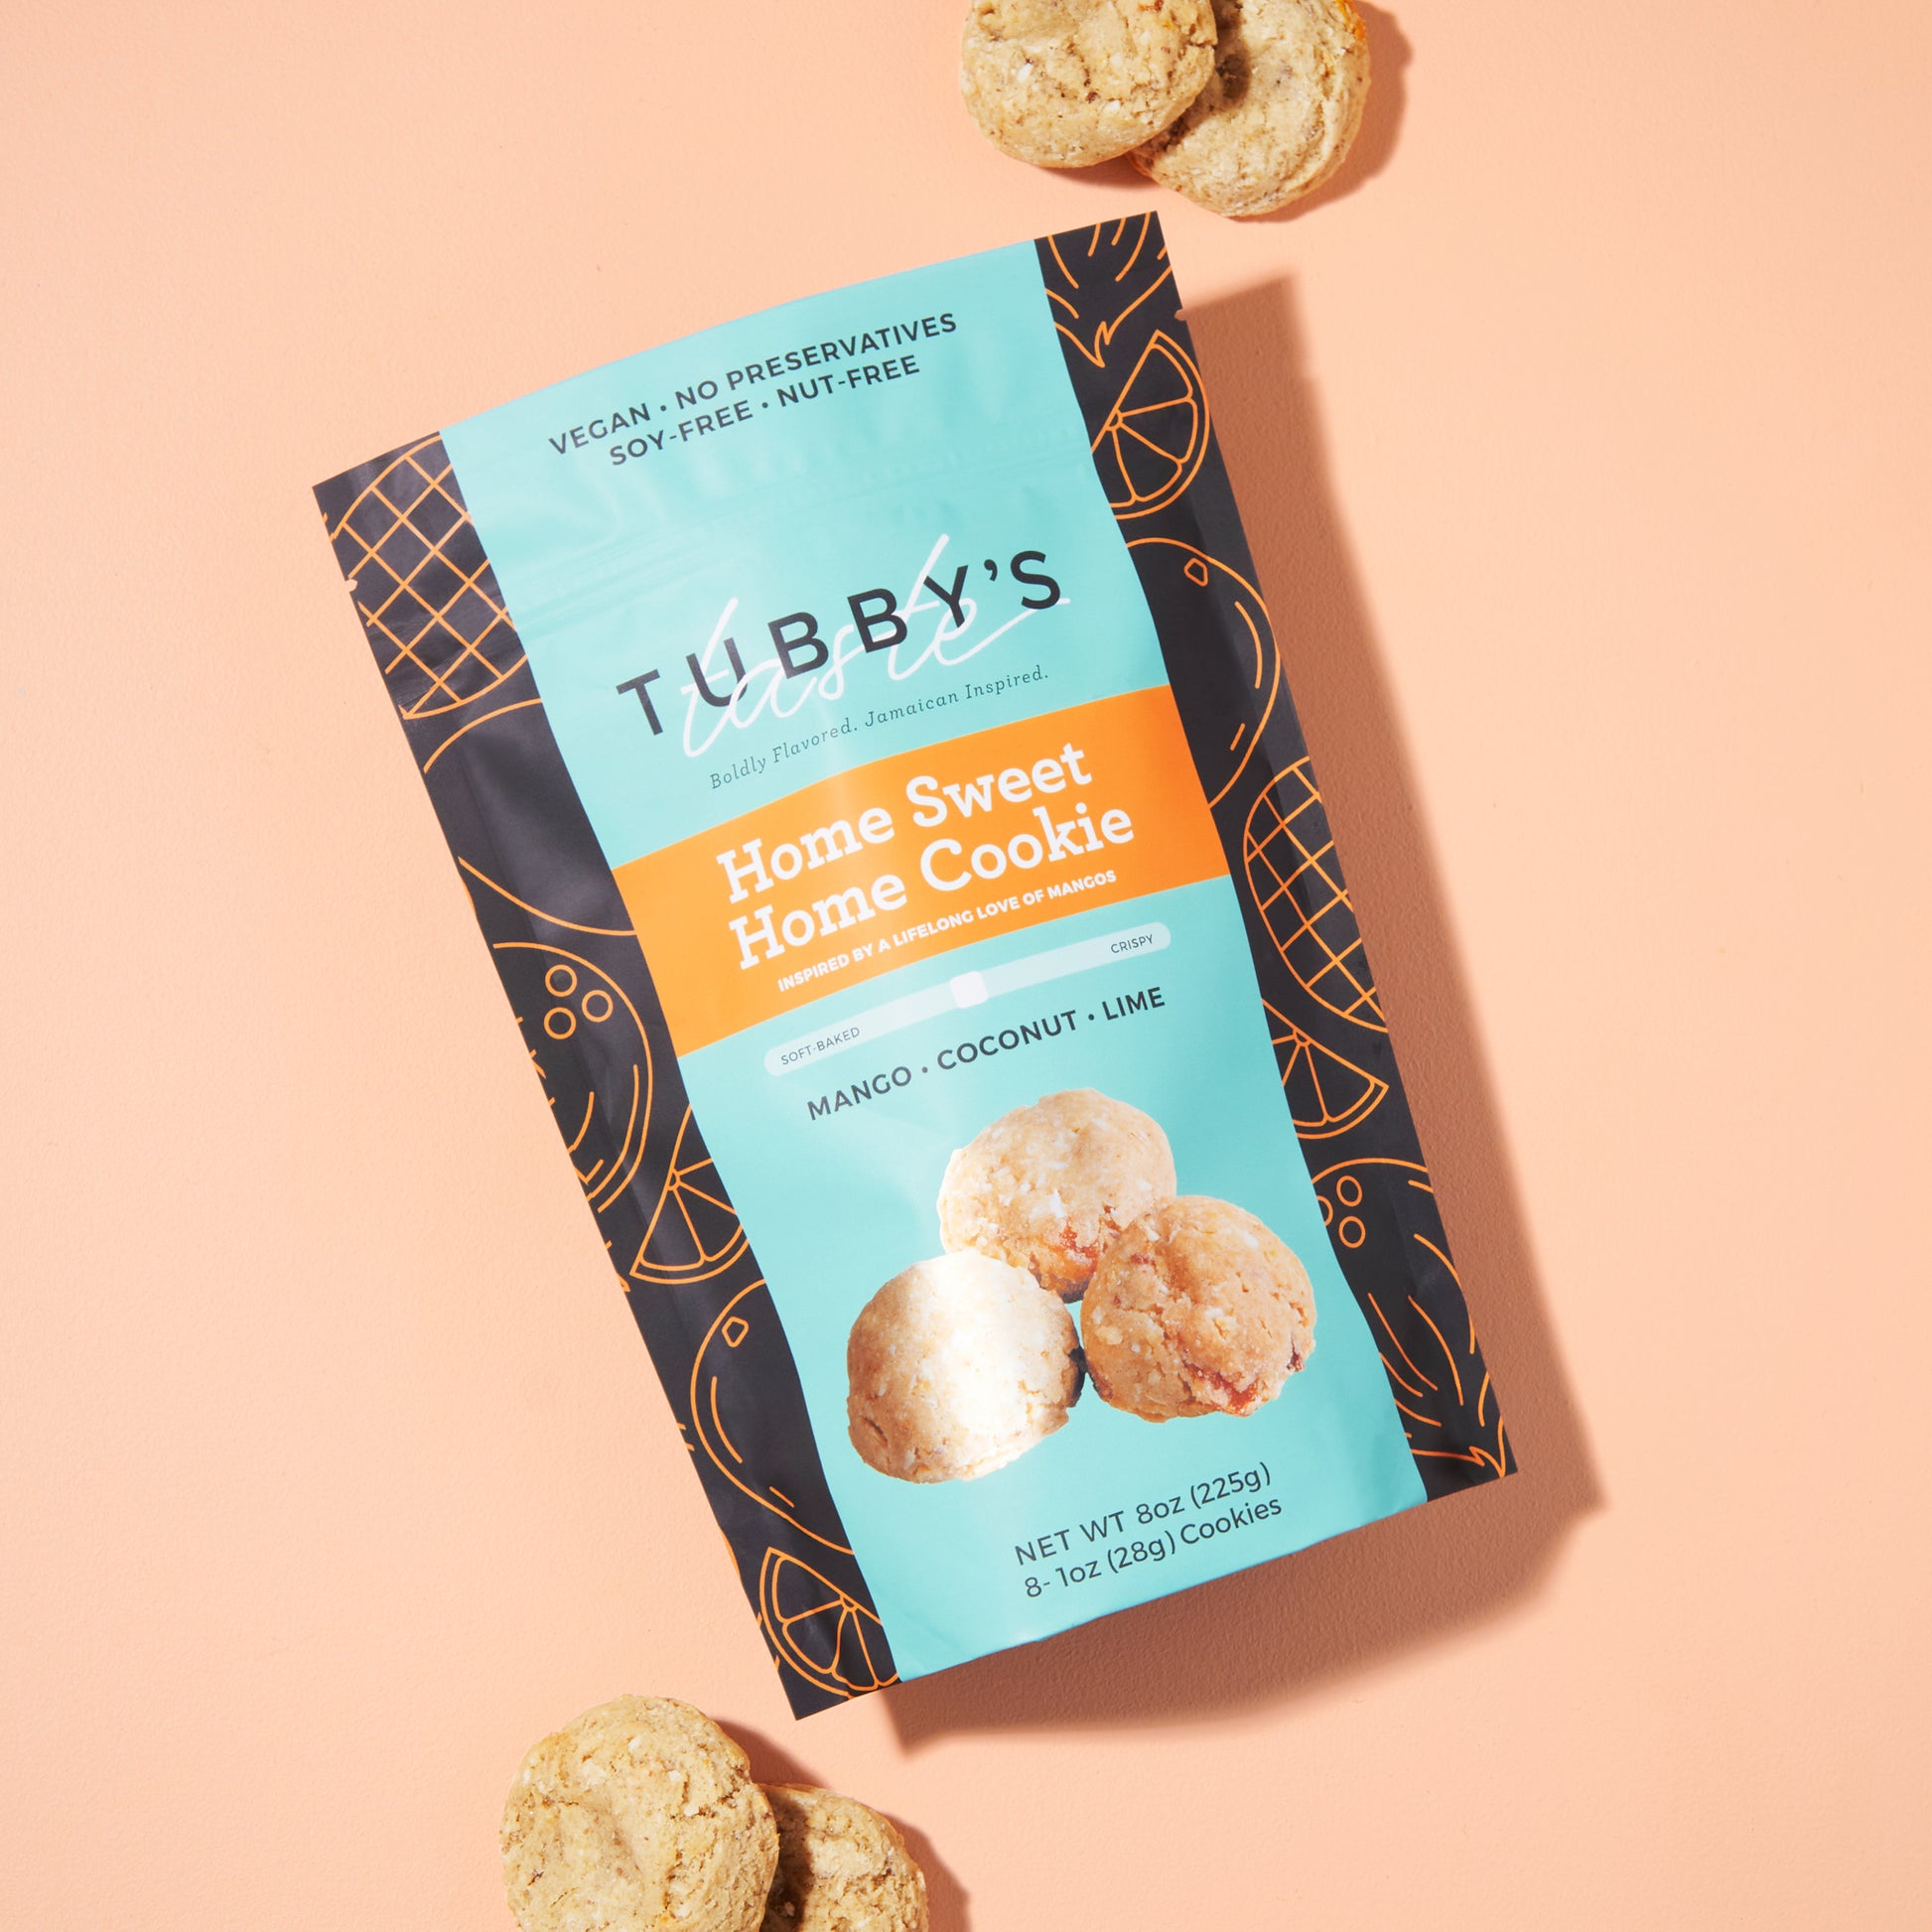 Four Mango Coconut Lime cookies coming out of a Tubby's Taste bag labeled Home Sweet Home on a salmon colored background.